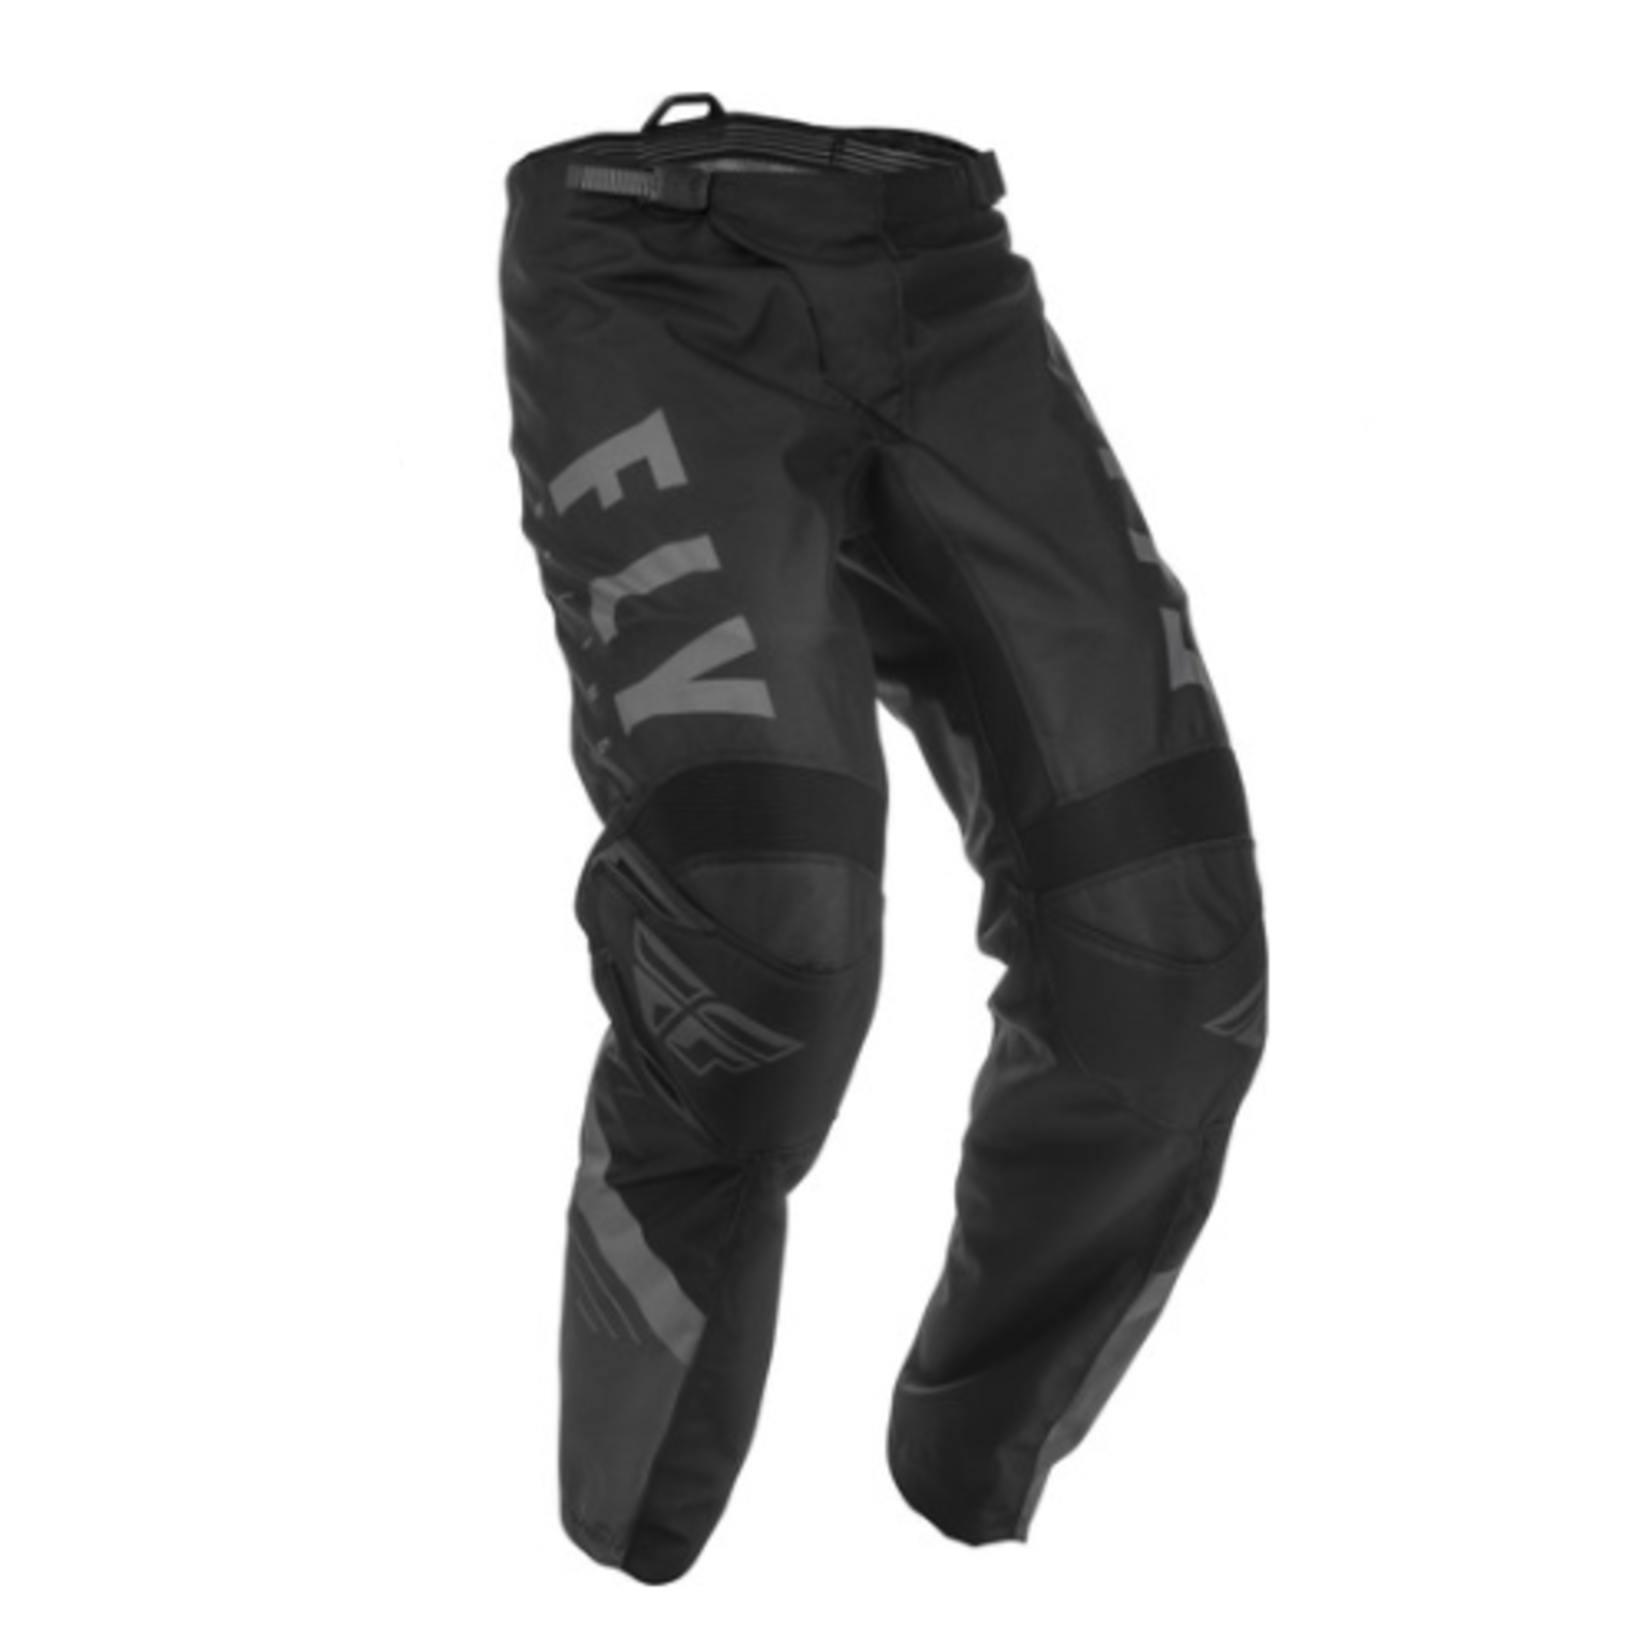 Fly Racing 2020 Fly F-16 Pant Black/Grey